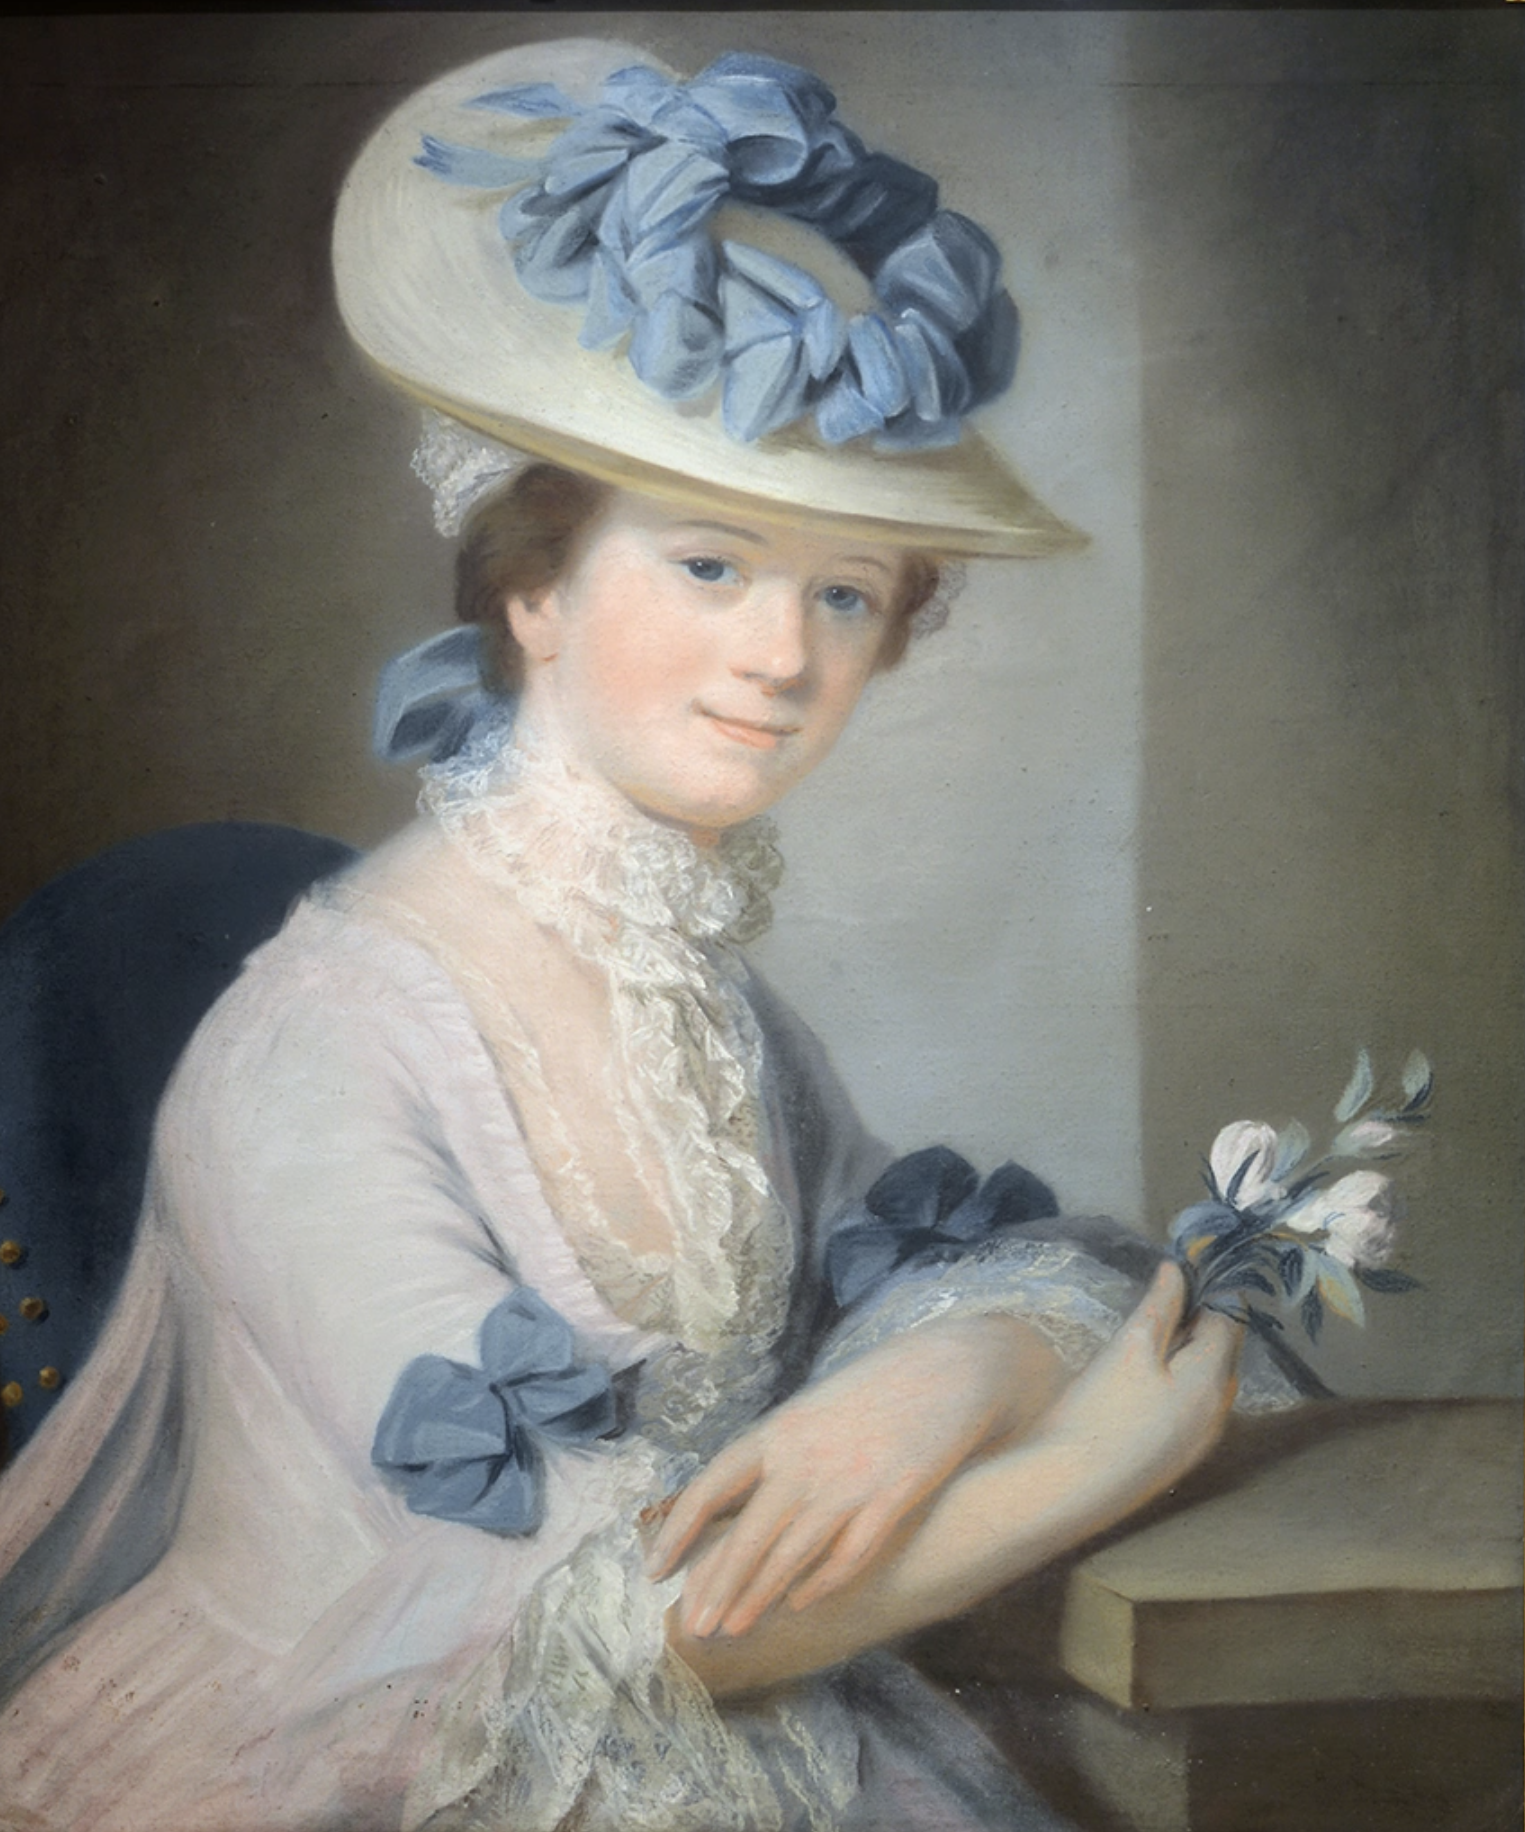 A half-length portrait of a young woman, seated on a blue chair and turned to meet the viewer’s gaze directly. She wears a cream dress with white lace and blue ribbons at her elbows, holding a sprig of white flowers in one hand. She wears a hat adorned with blue ribbons and bows, with more lace. Her expression is sweet, with a slight smile. 